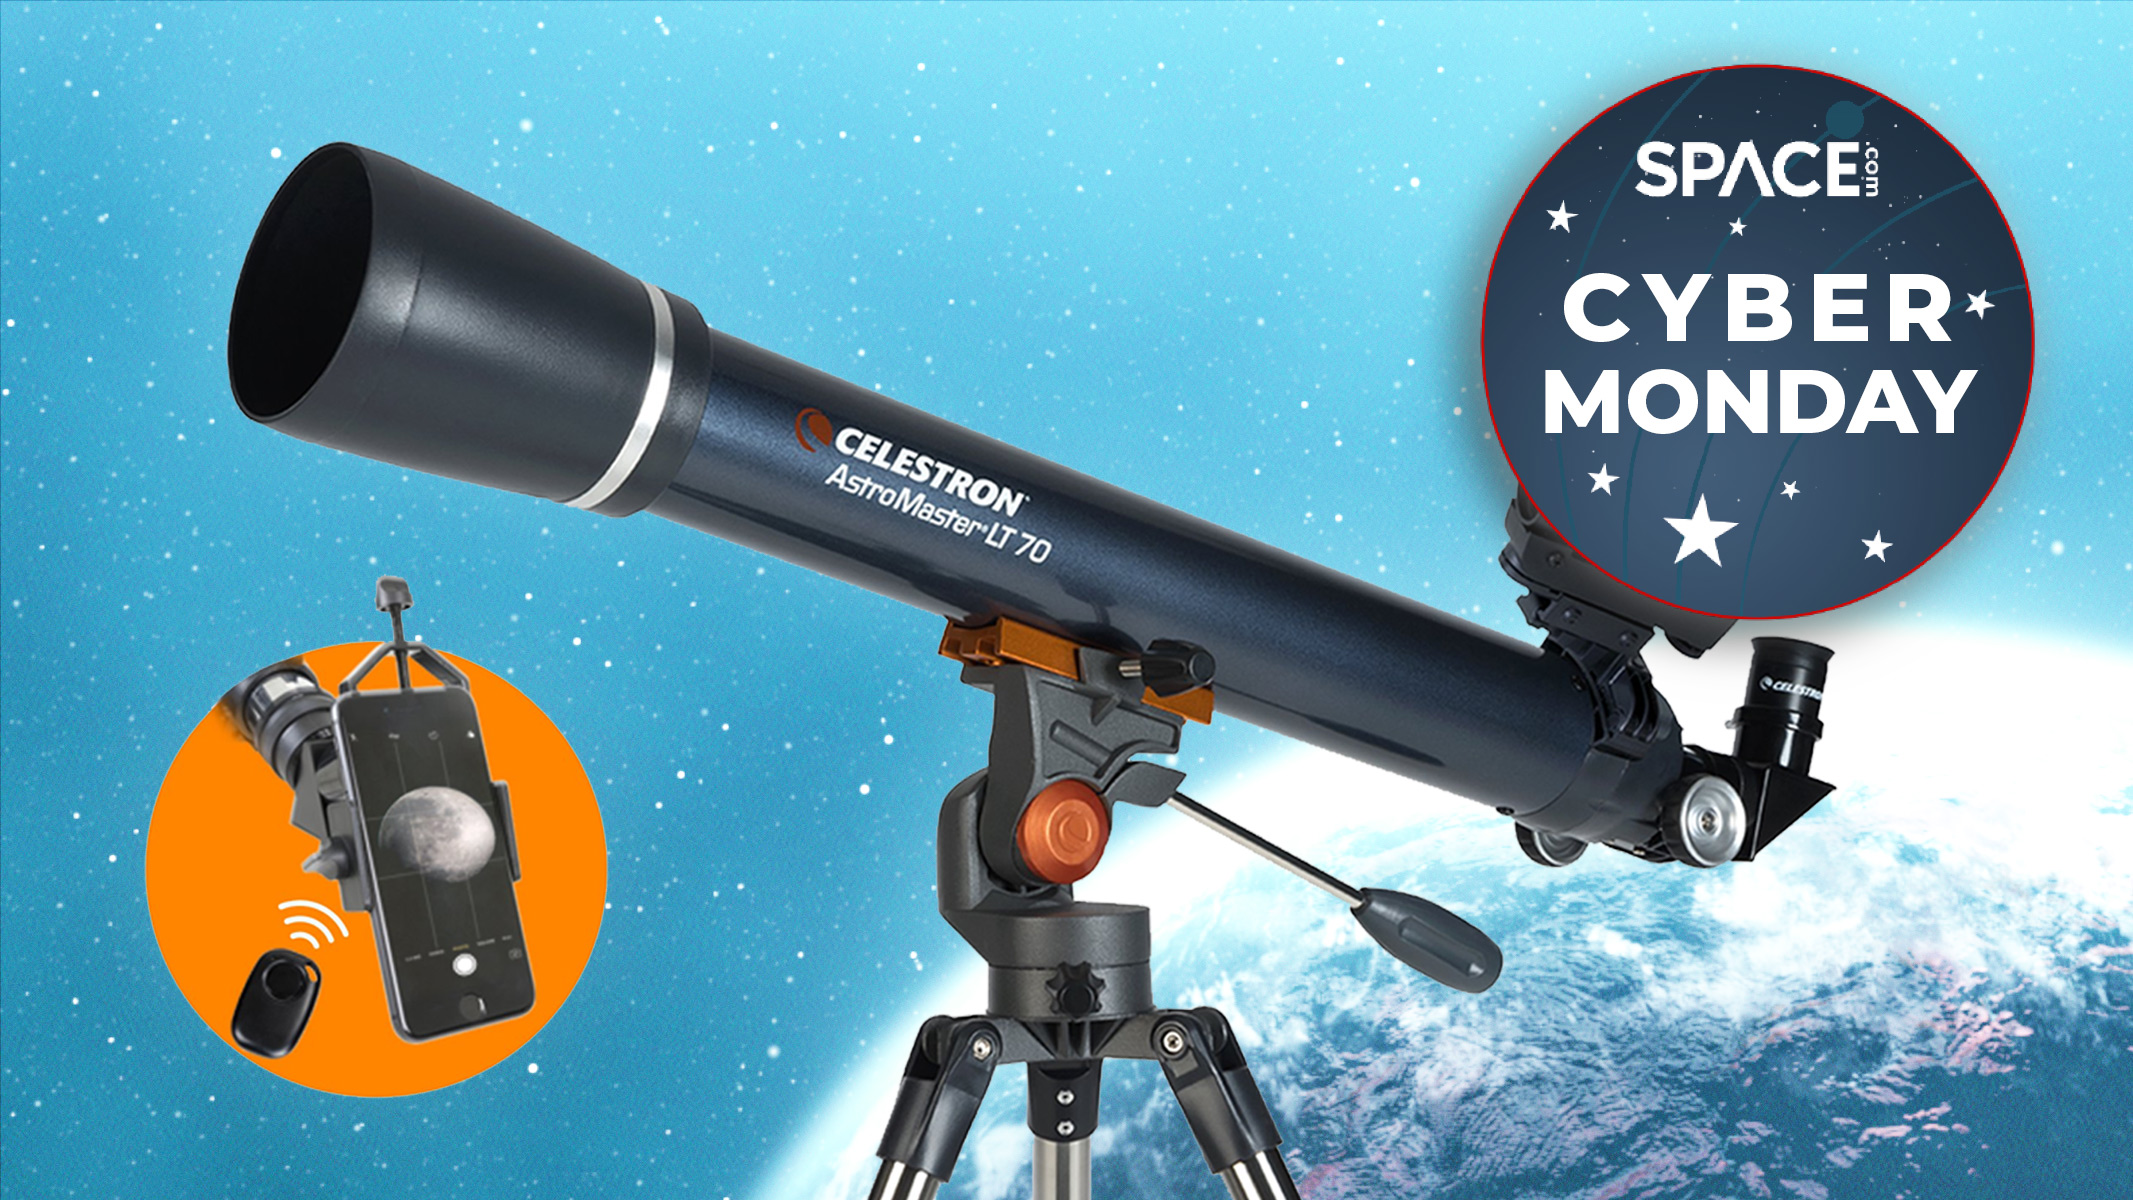 Charotar Globe Daily Celestron astromaster lt70az with starry background and cyber monday deal logo